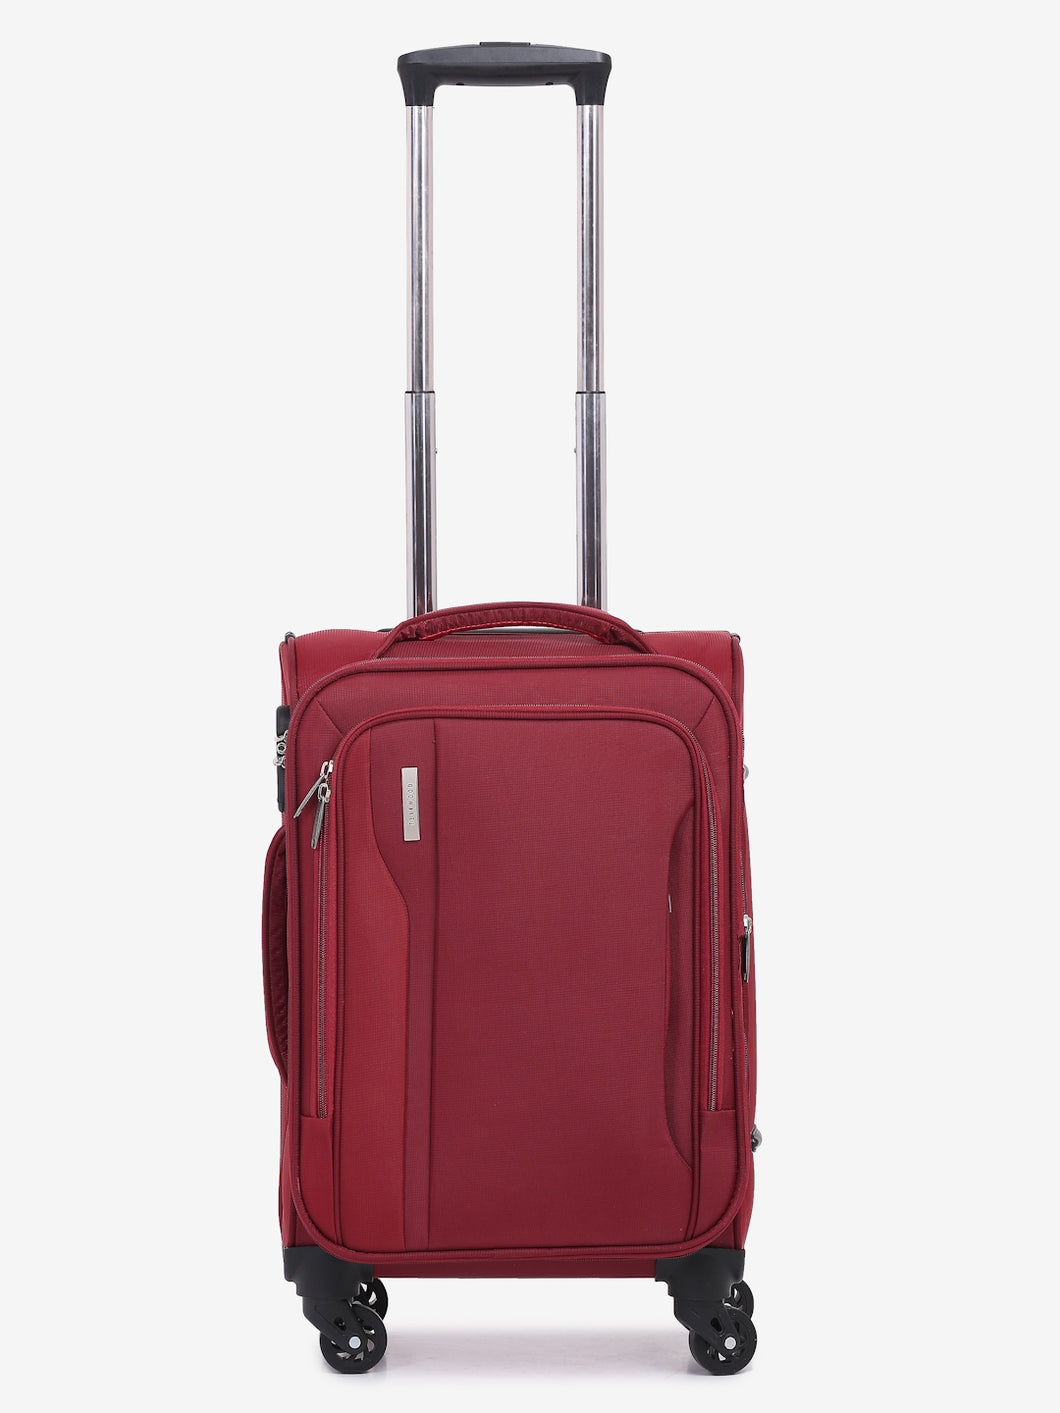 Unisex Red Solid Soft-sided Cabin Size Trolley Suitcase